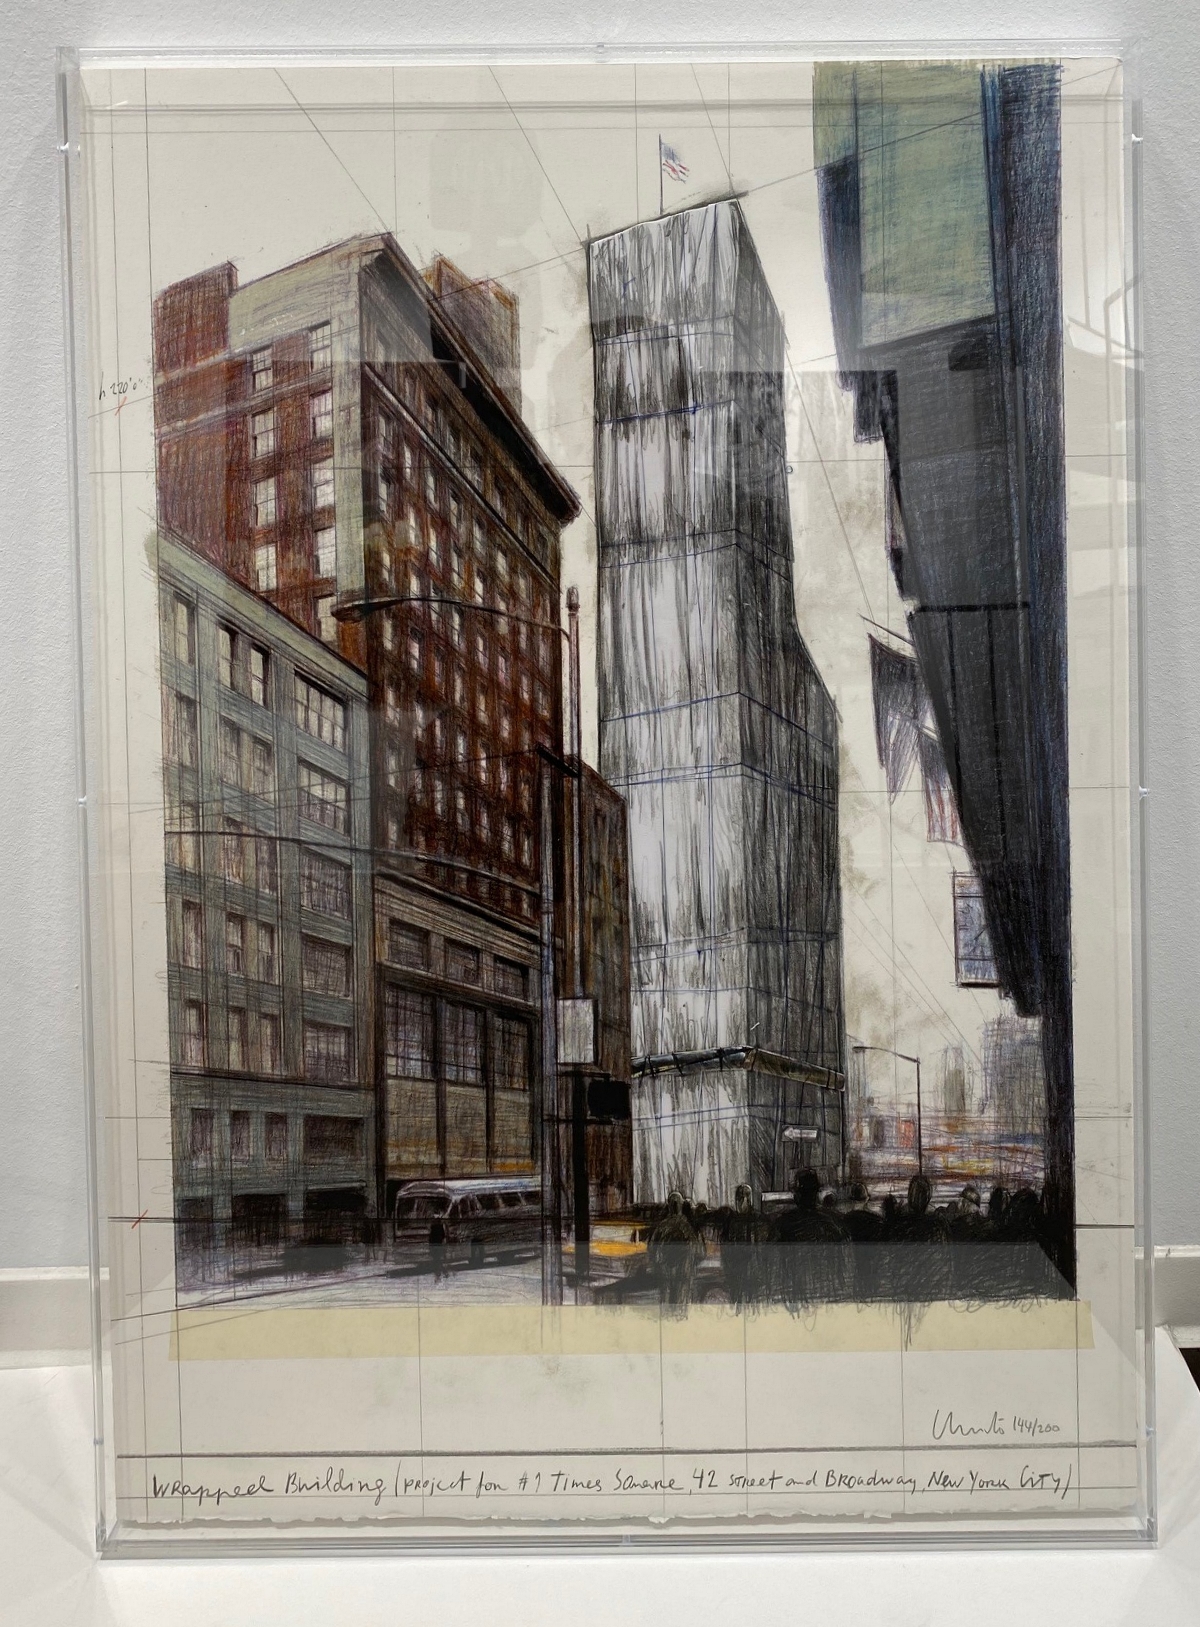 Wrapped Building,  Project for No. 1 Times Square